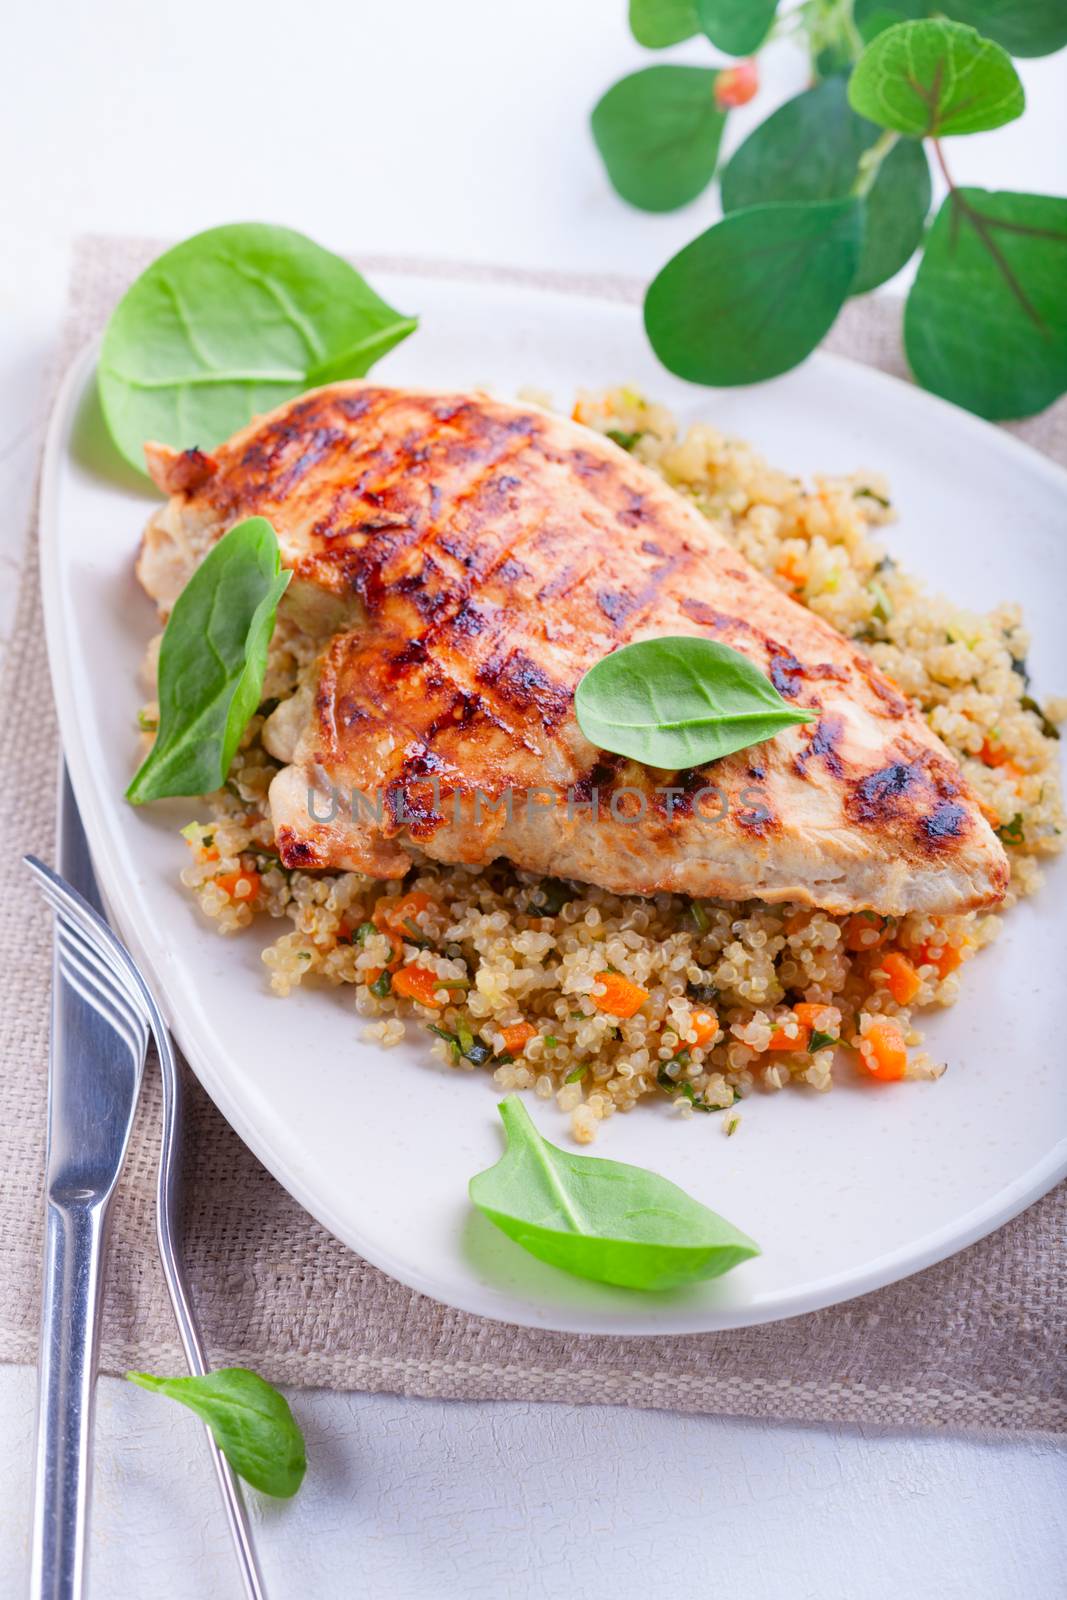 Grilled chicken breast  with quinoa and vegetables